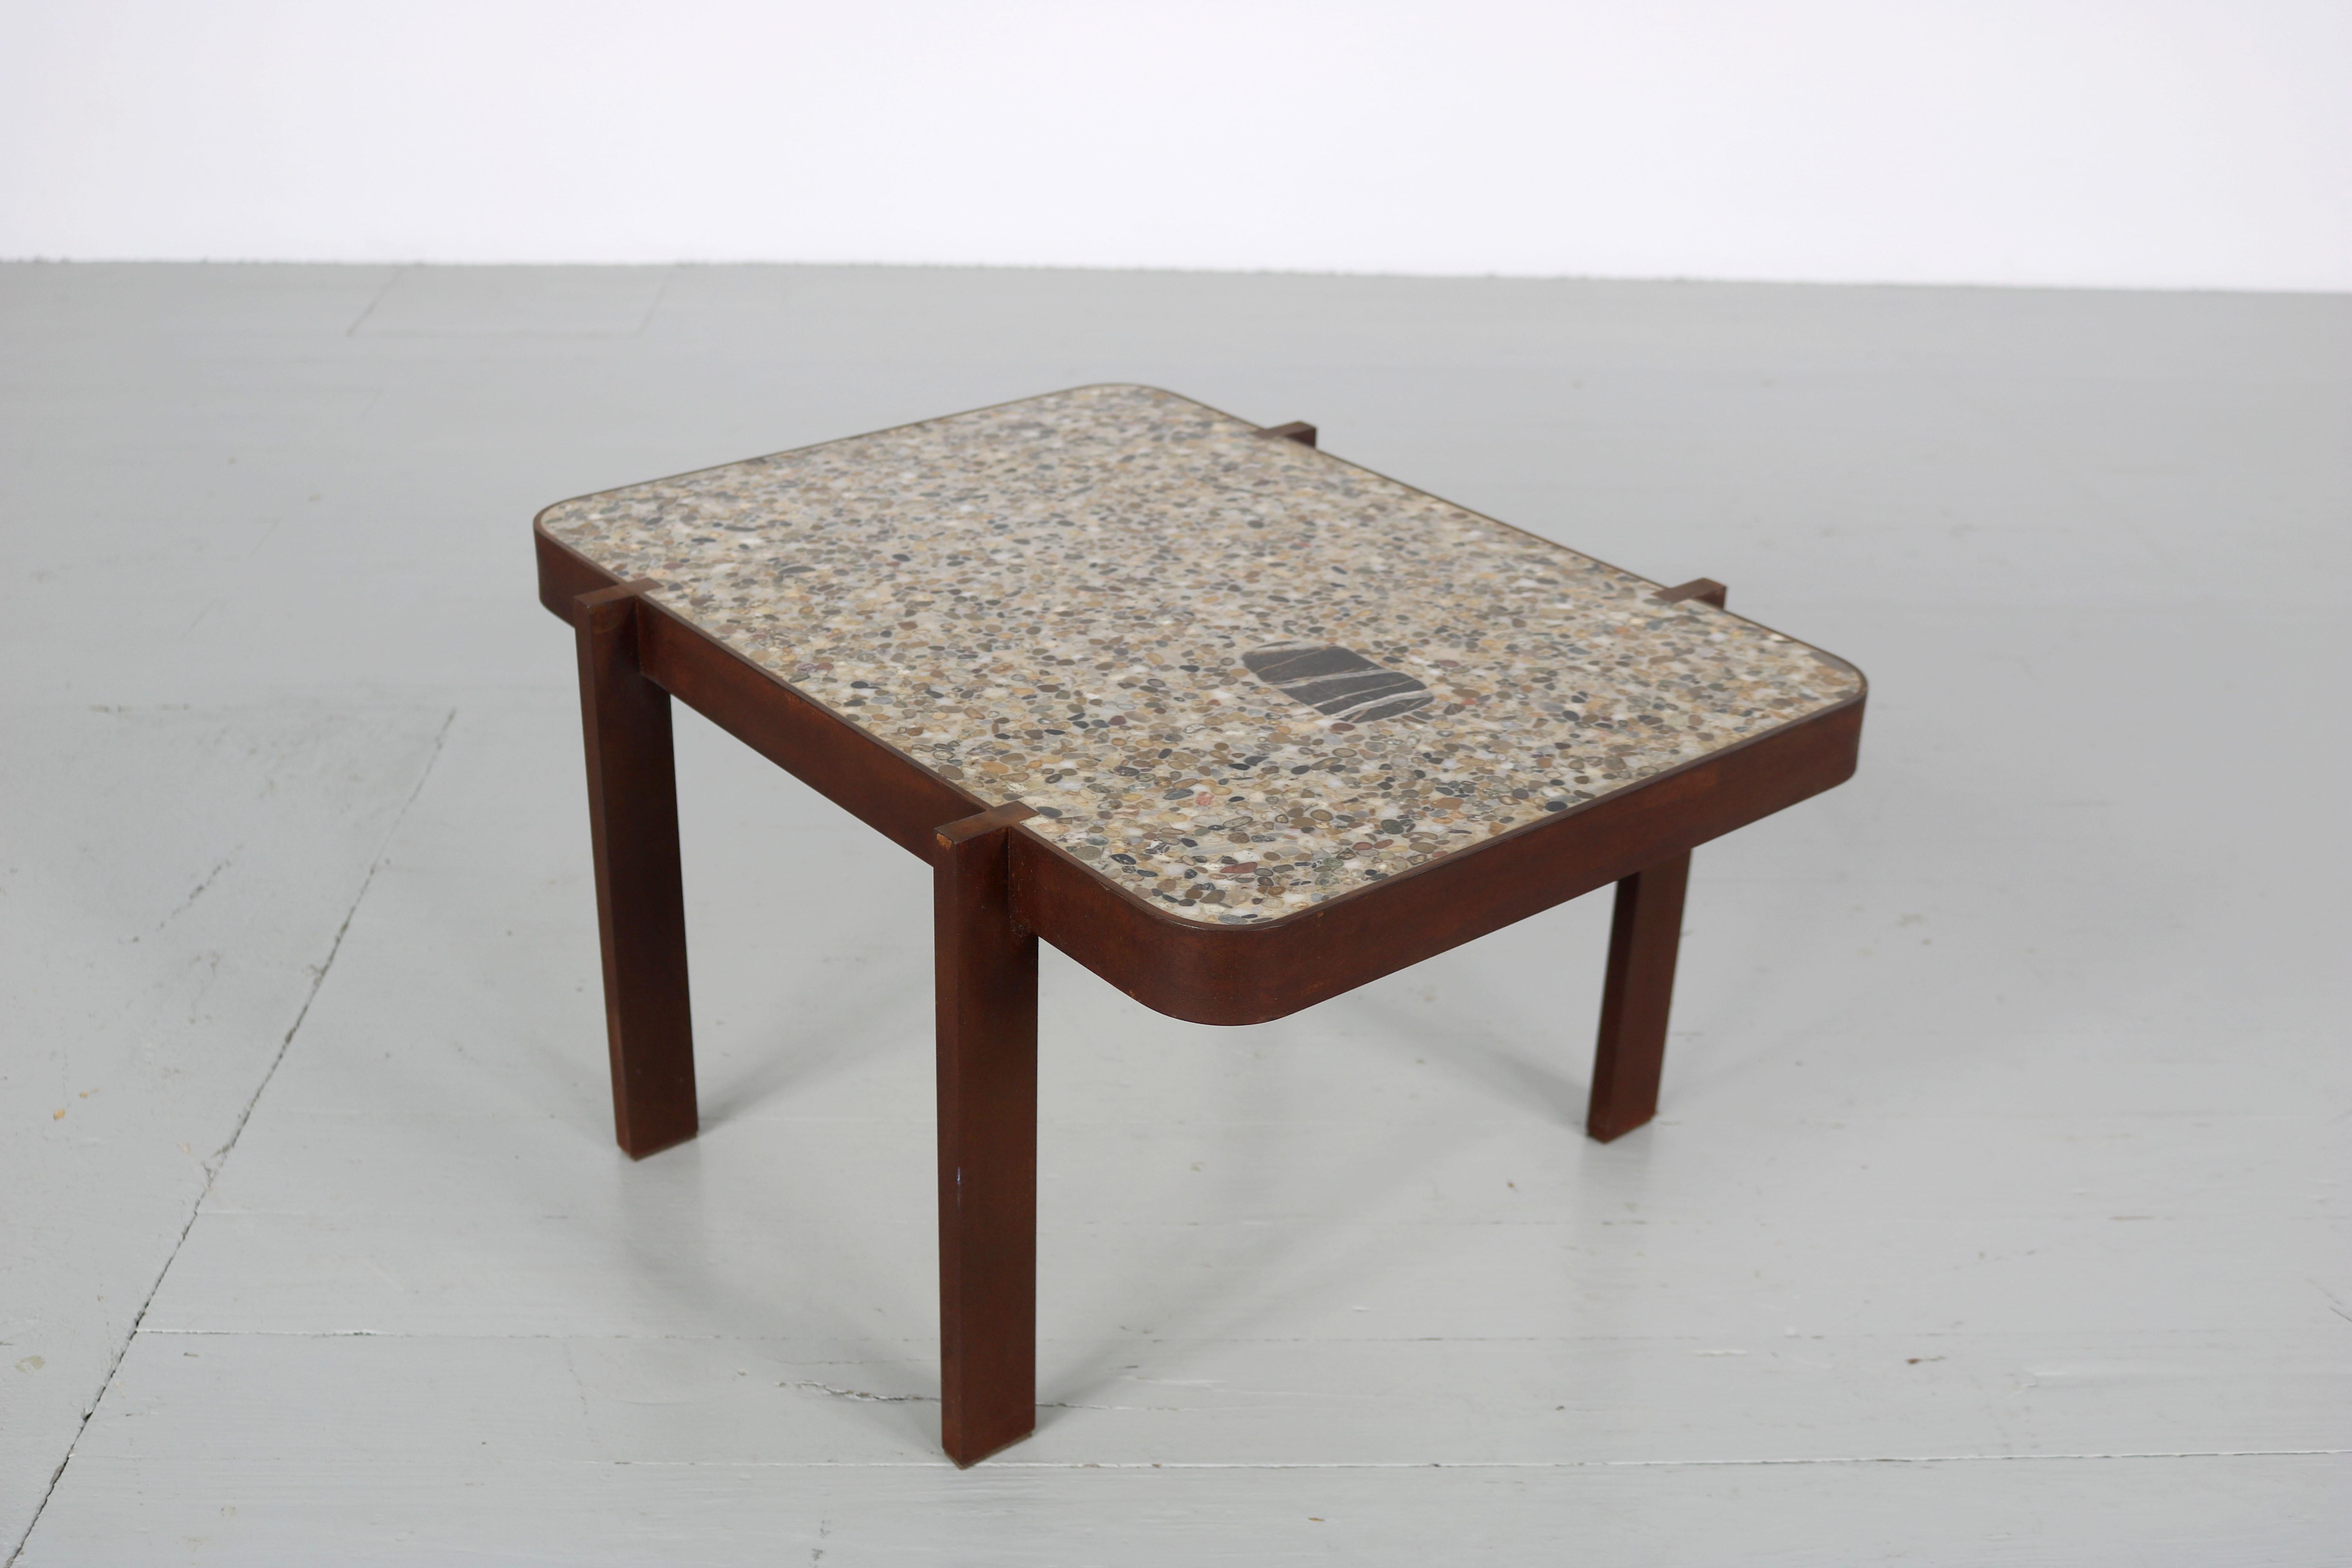 Felix Muhrhofer Contemporary Terrazzo Table with Corroded Steel Construction 12